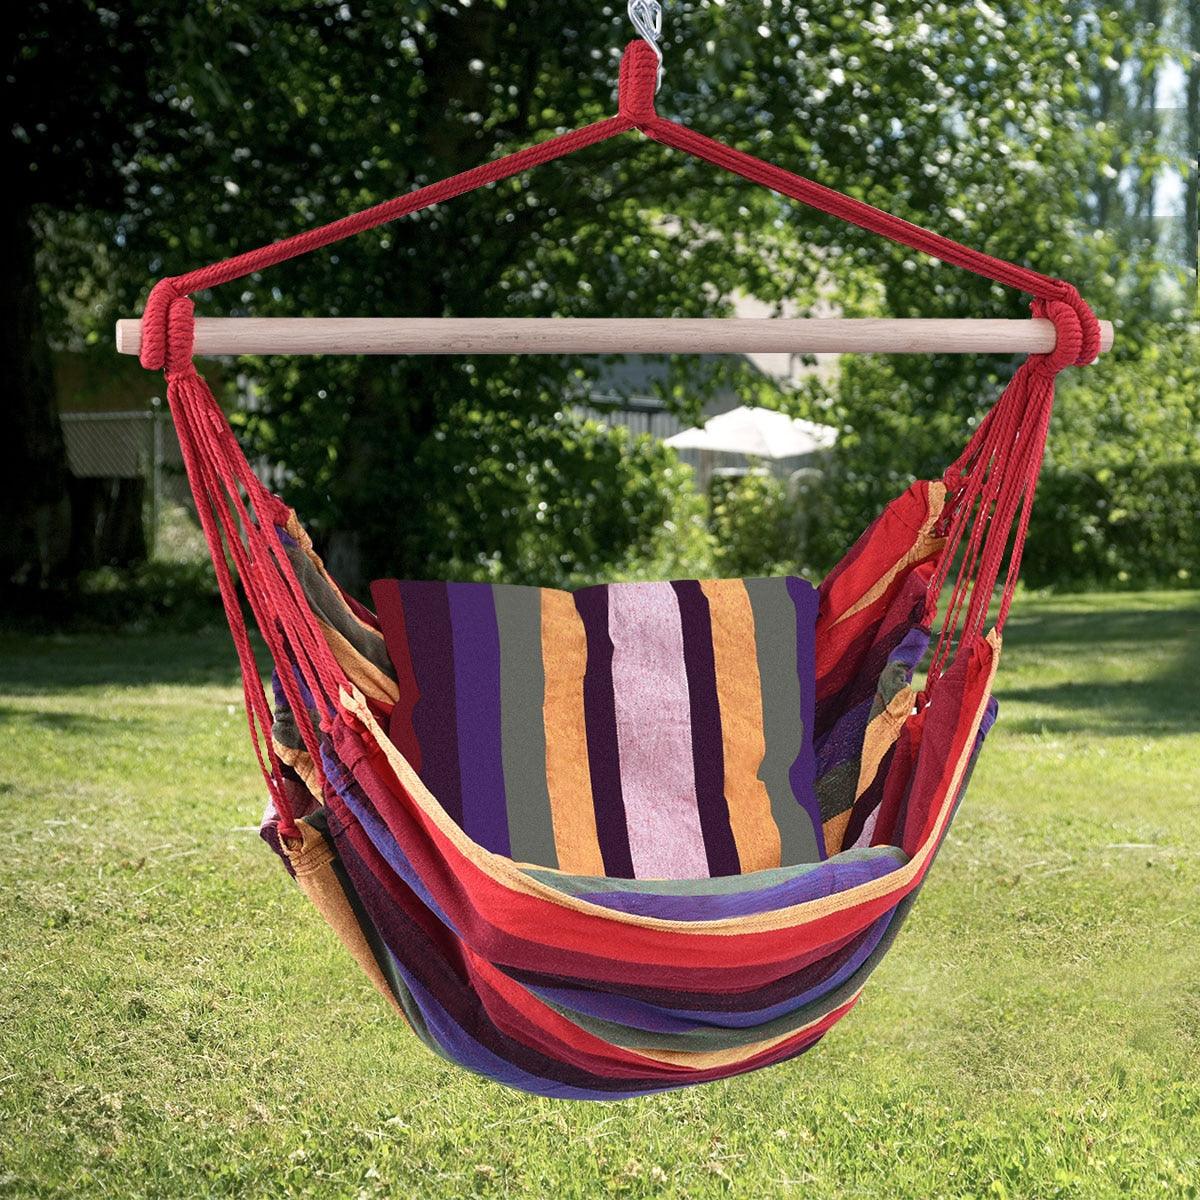 Hammock Rope Chair Patio Porch Yard Tree Hanging Air Swing Outdoor (Red) (D67)(FW2)(1U67)